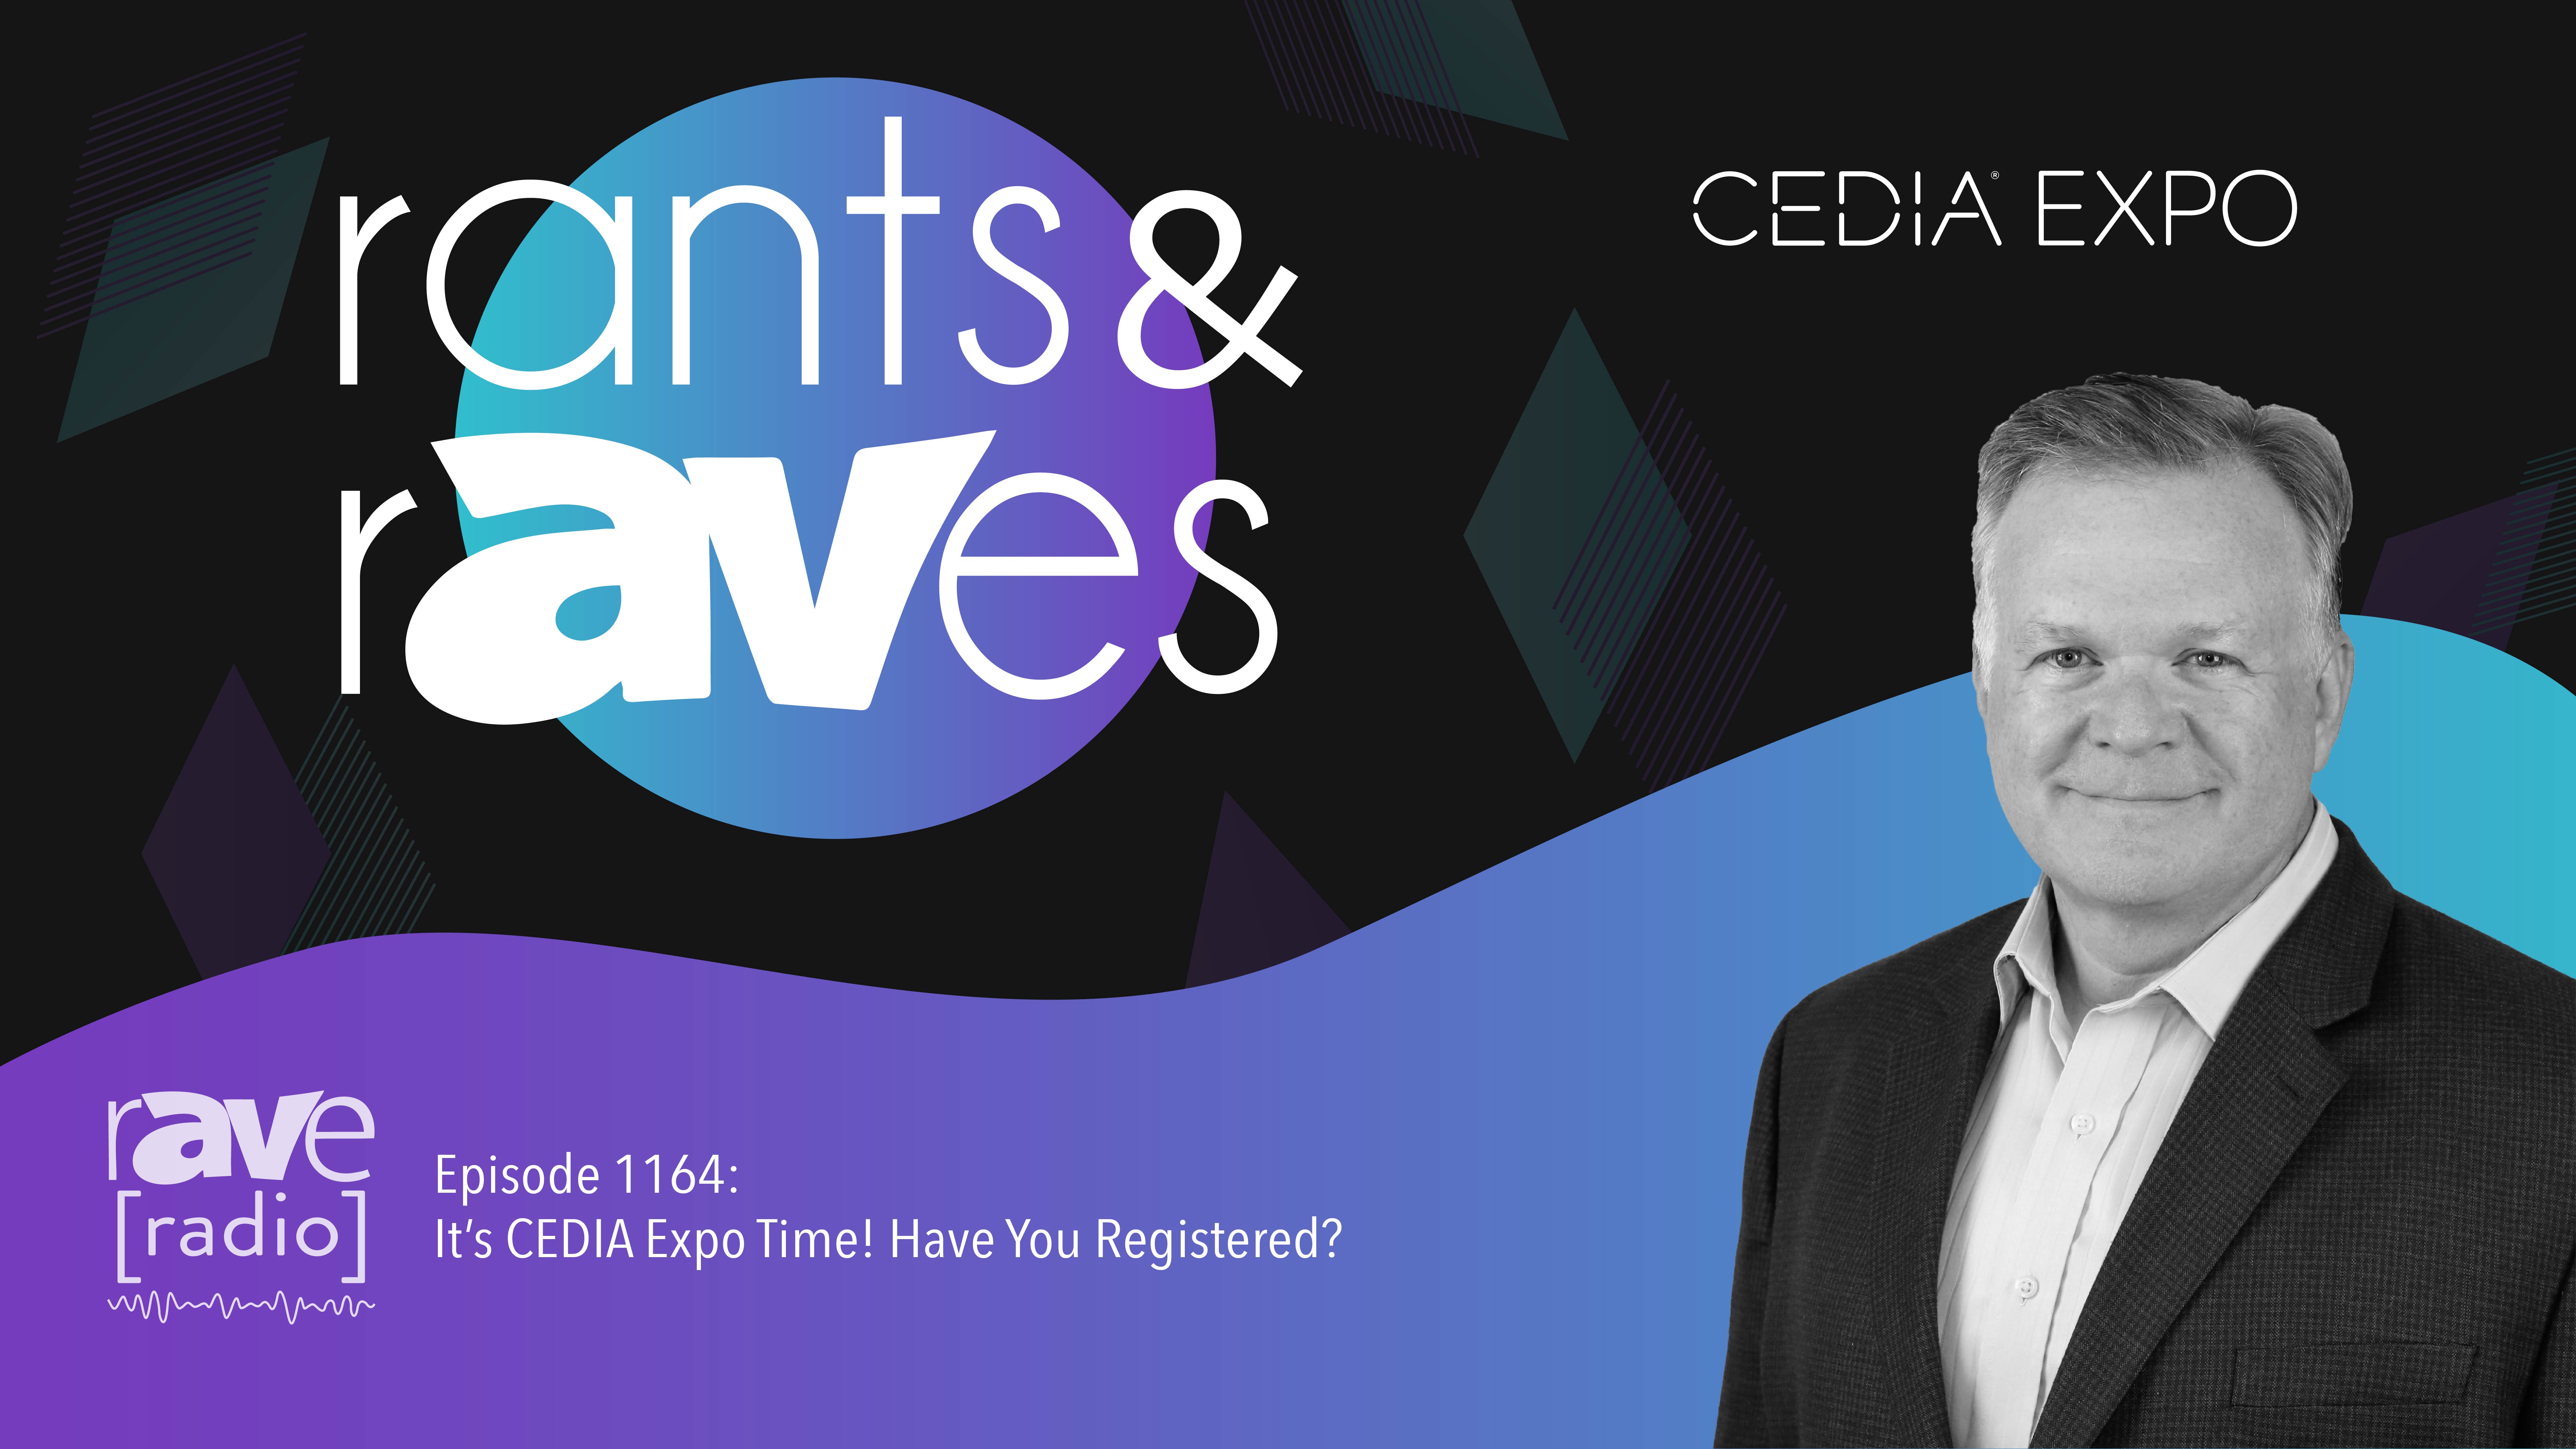 Rants & rAVes — Episode 1164: It’s CEDIA Expo Time! Have You Registered?